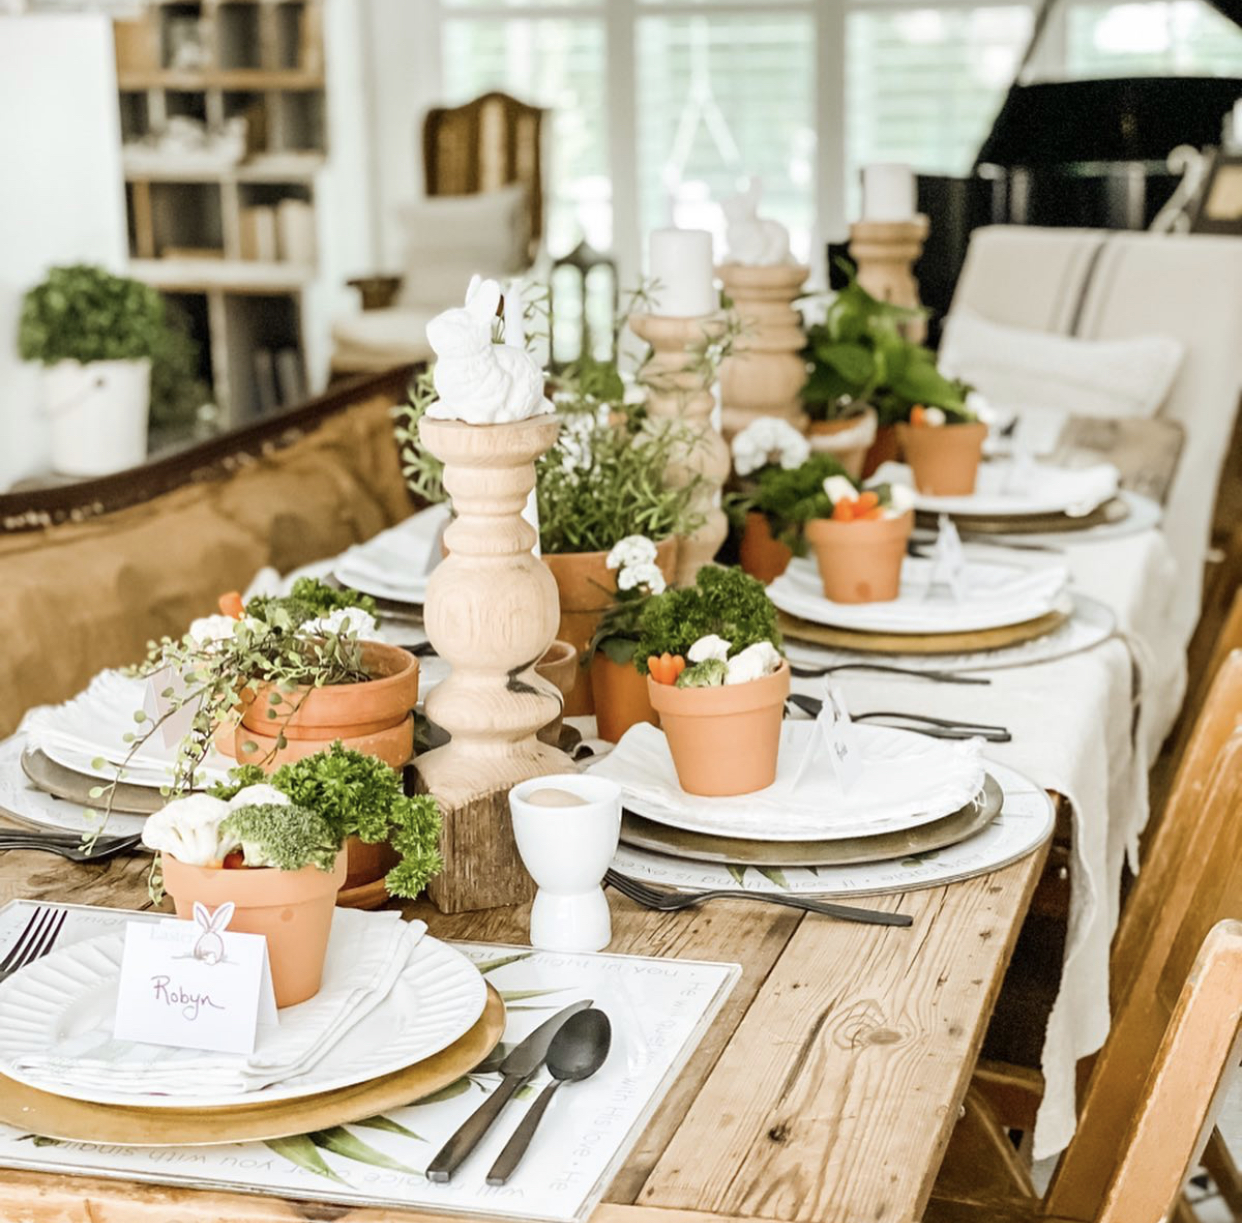 small terracotta pots at each place setting with veggies in each one